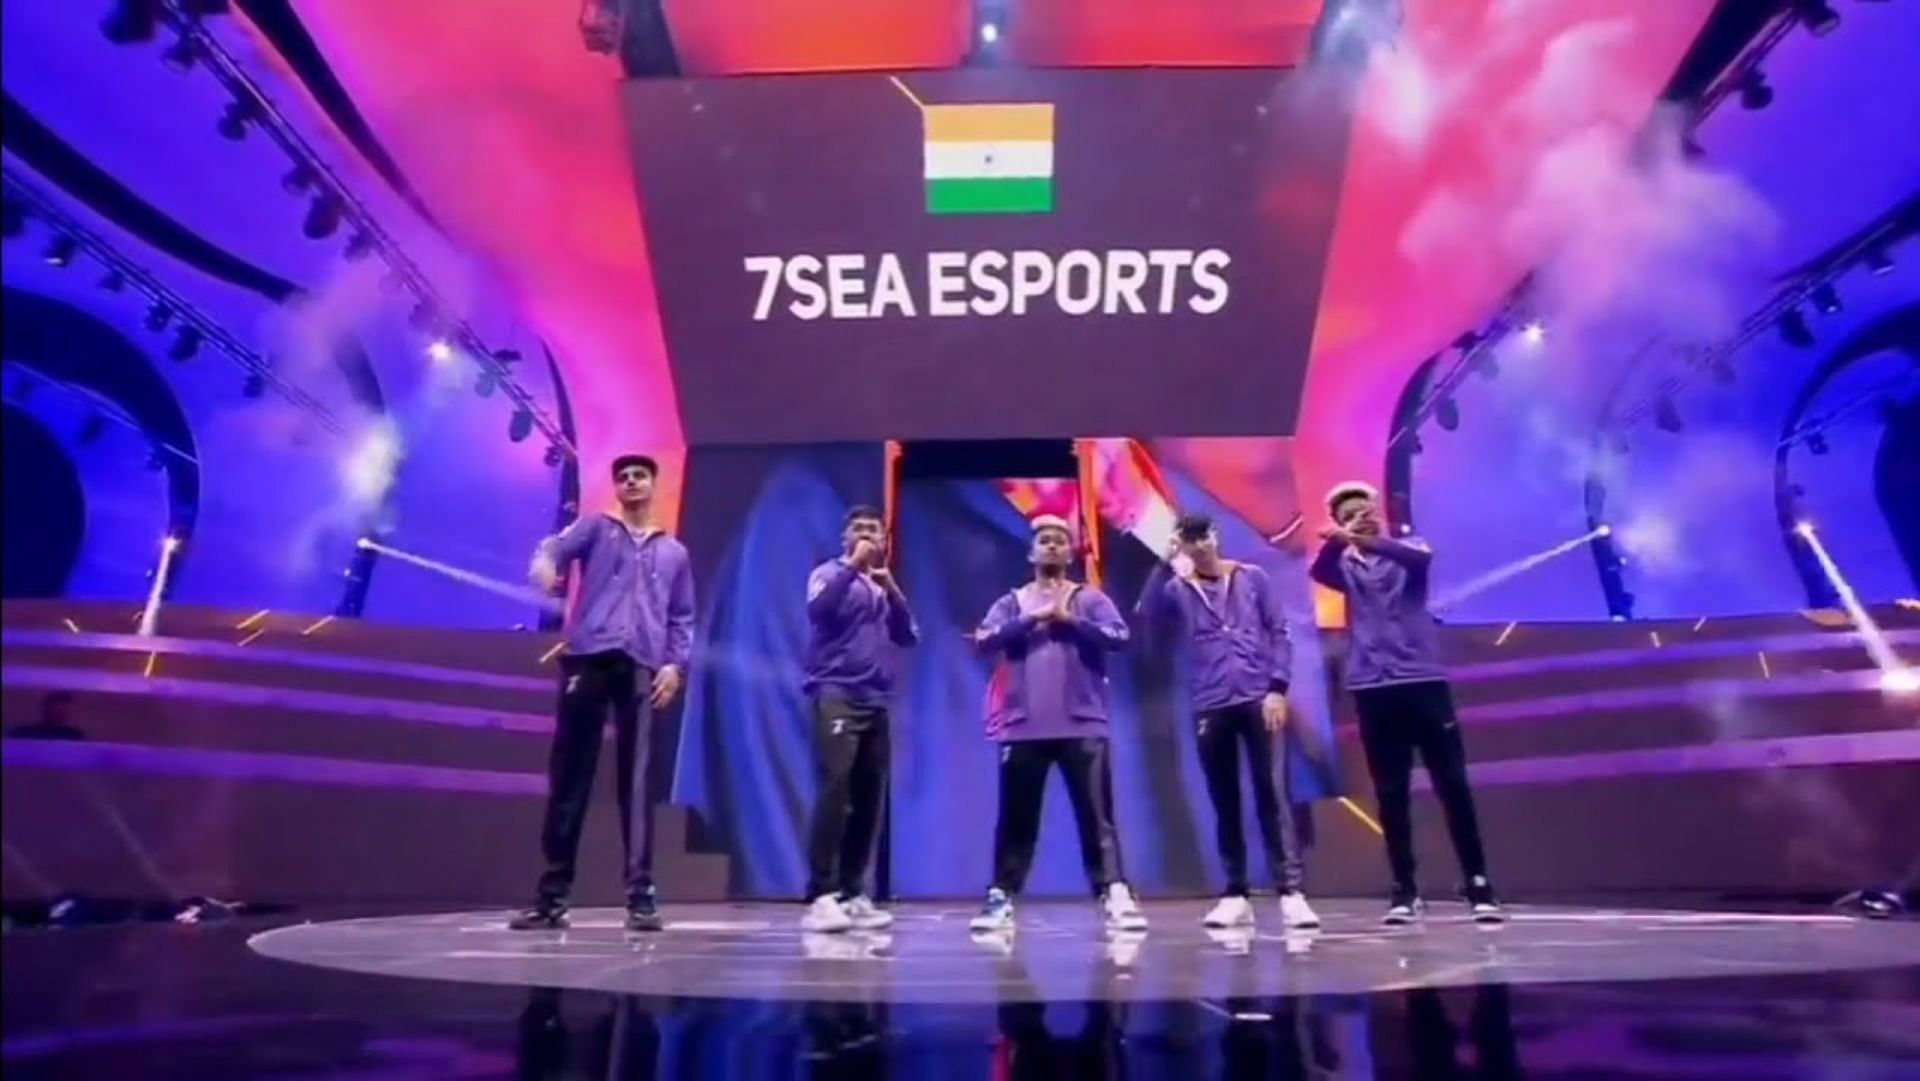 7Sea Esports was the only Indian team in the PMWI 2022: Afterparty Showdown (Image via YouTube: PUBG Mobile Esports)